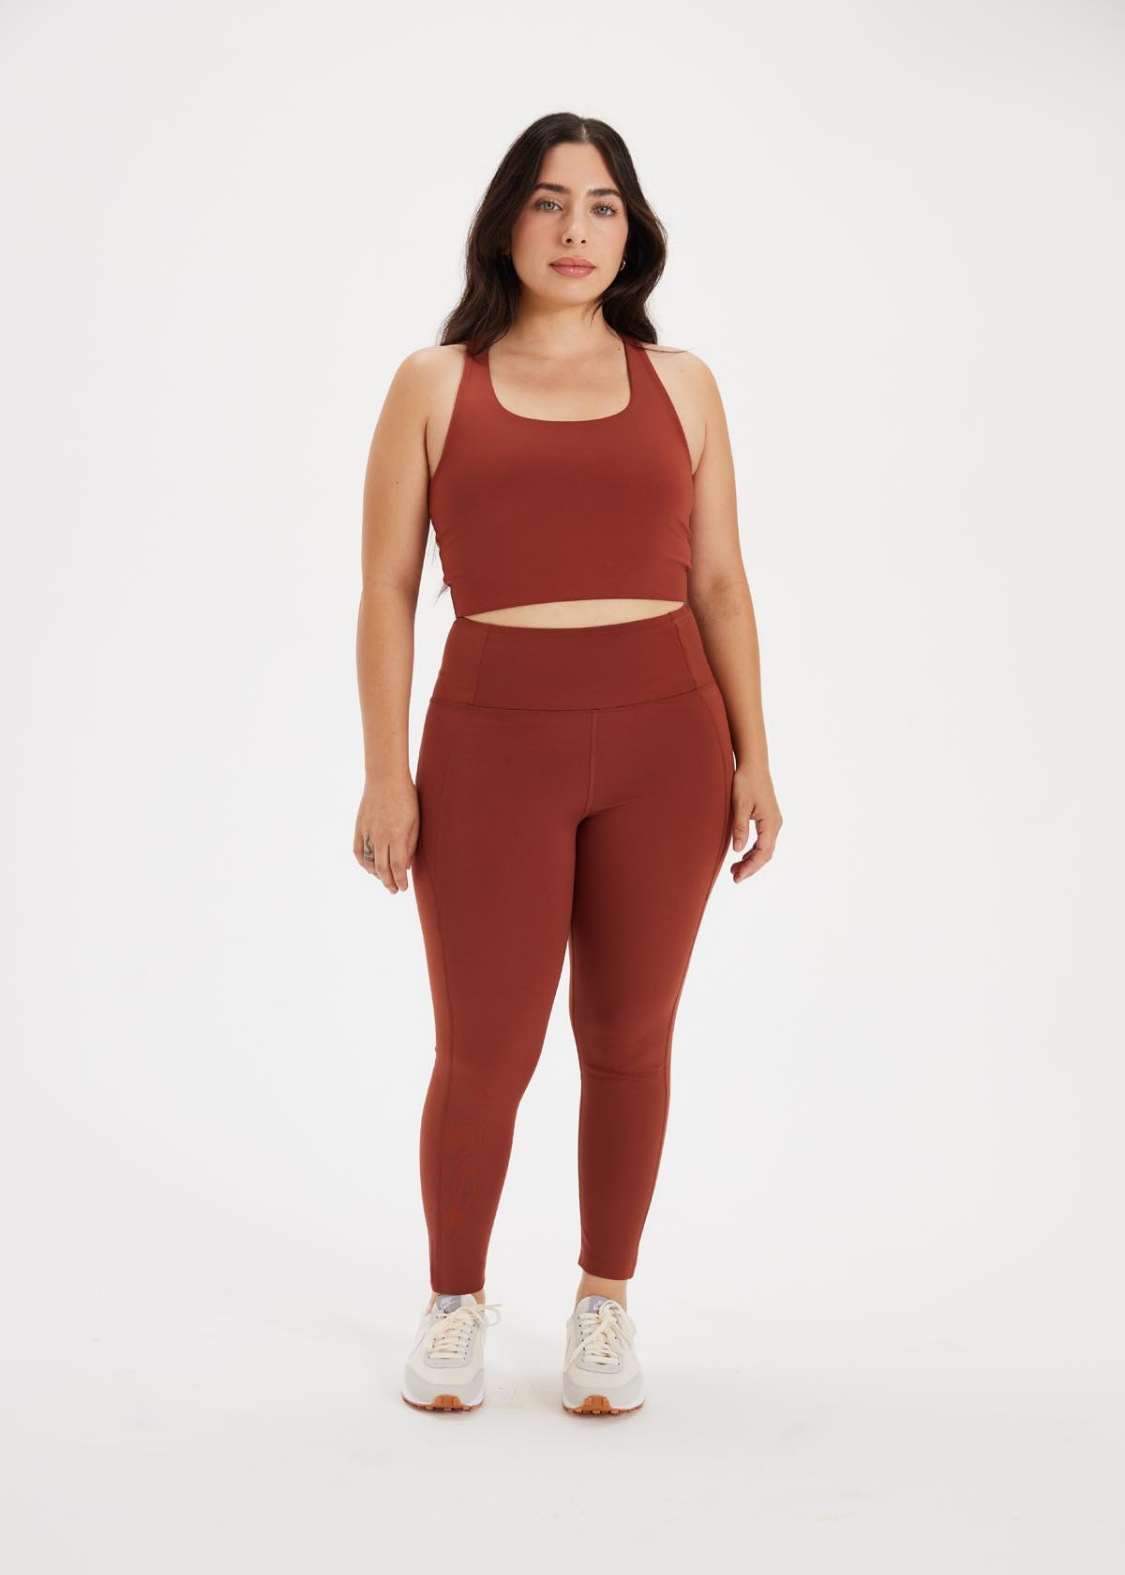 Girlfriend Collective High Rise Legging in Geranium – Style Trend Clothiers